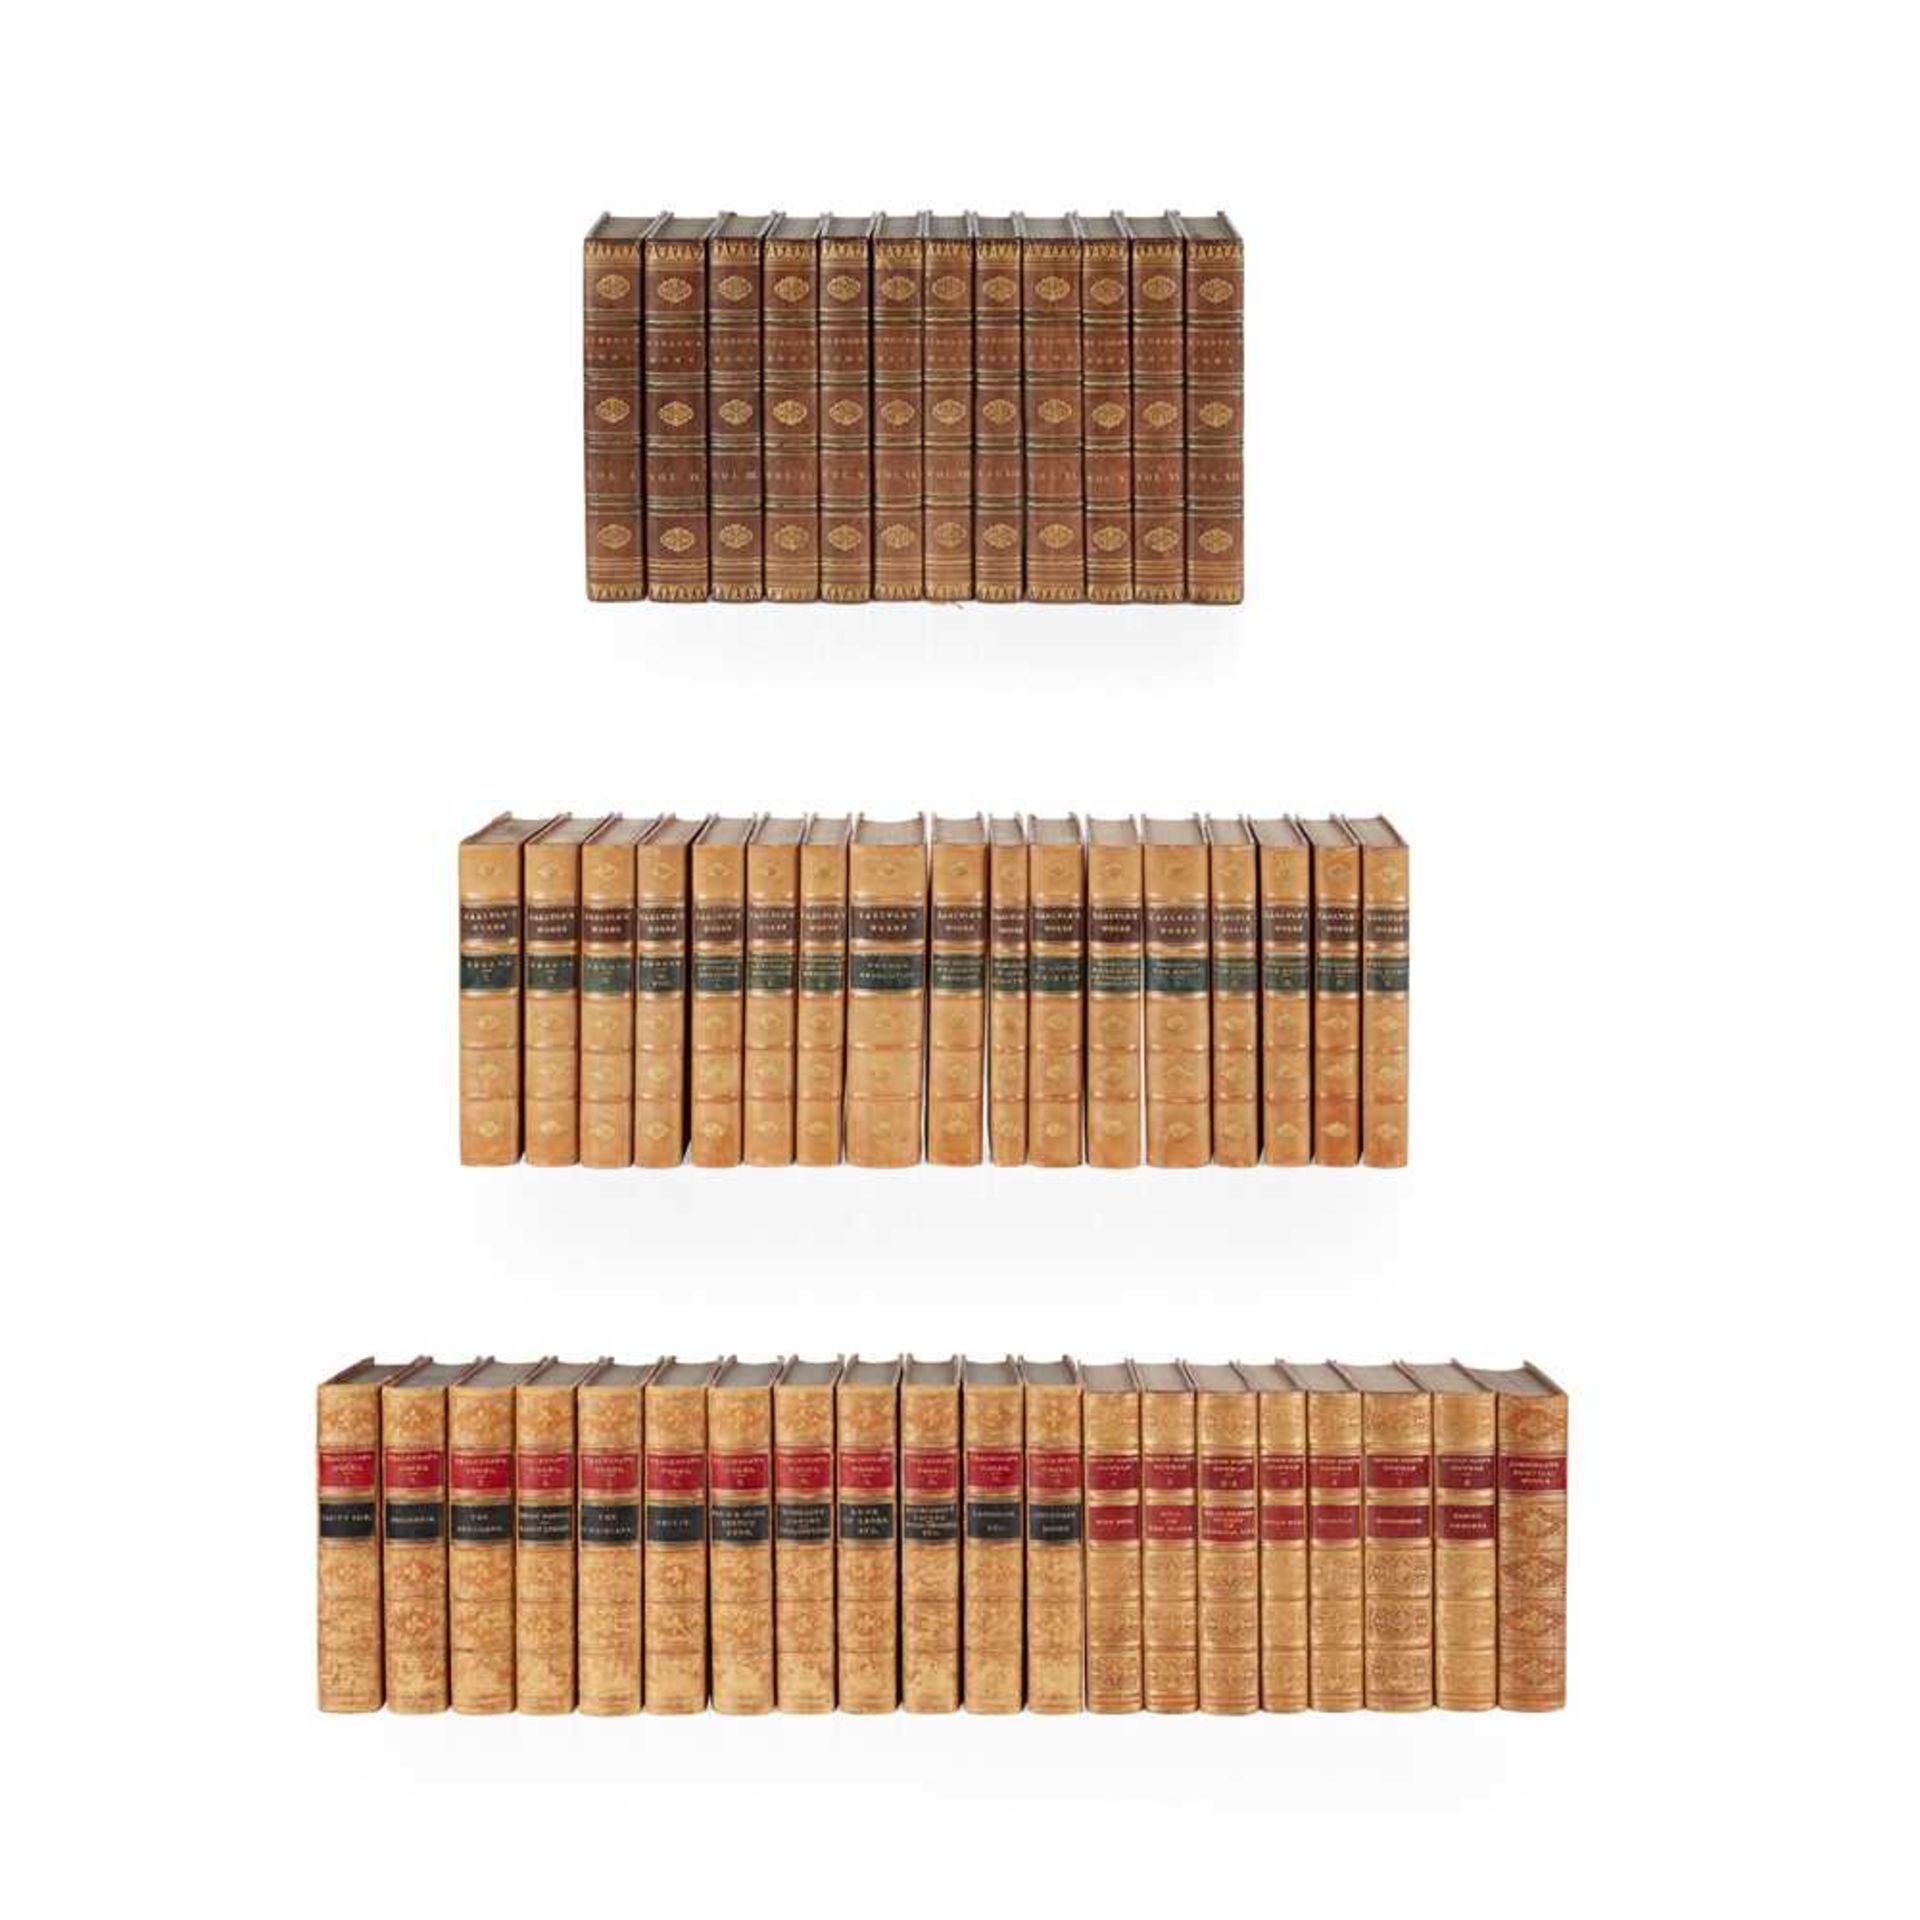 Bindings - George Eliot, Thomas Carlyle, and W.M. Thackeray 50 volumes, comprising